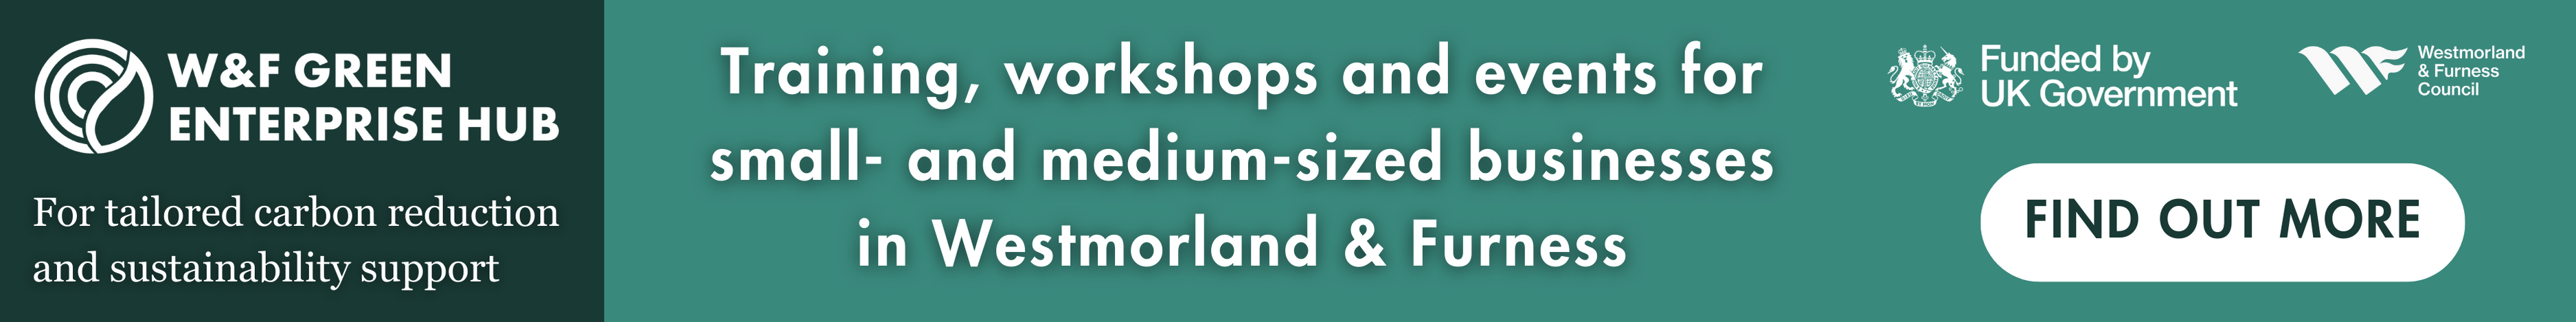 Training, workshops and events for small- and medium-sized businesses in Westmorland & Furness